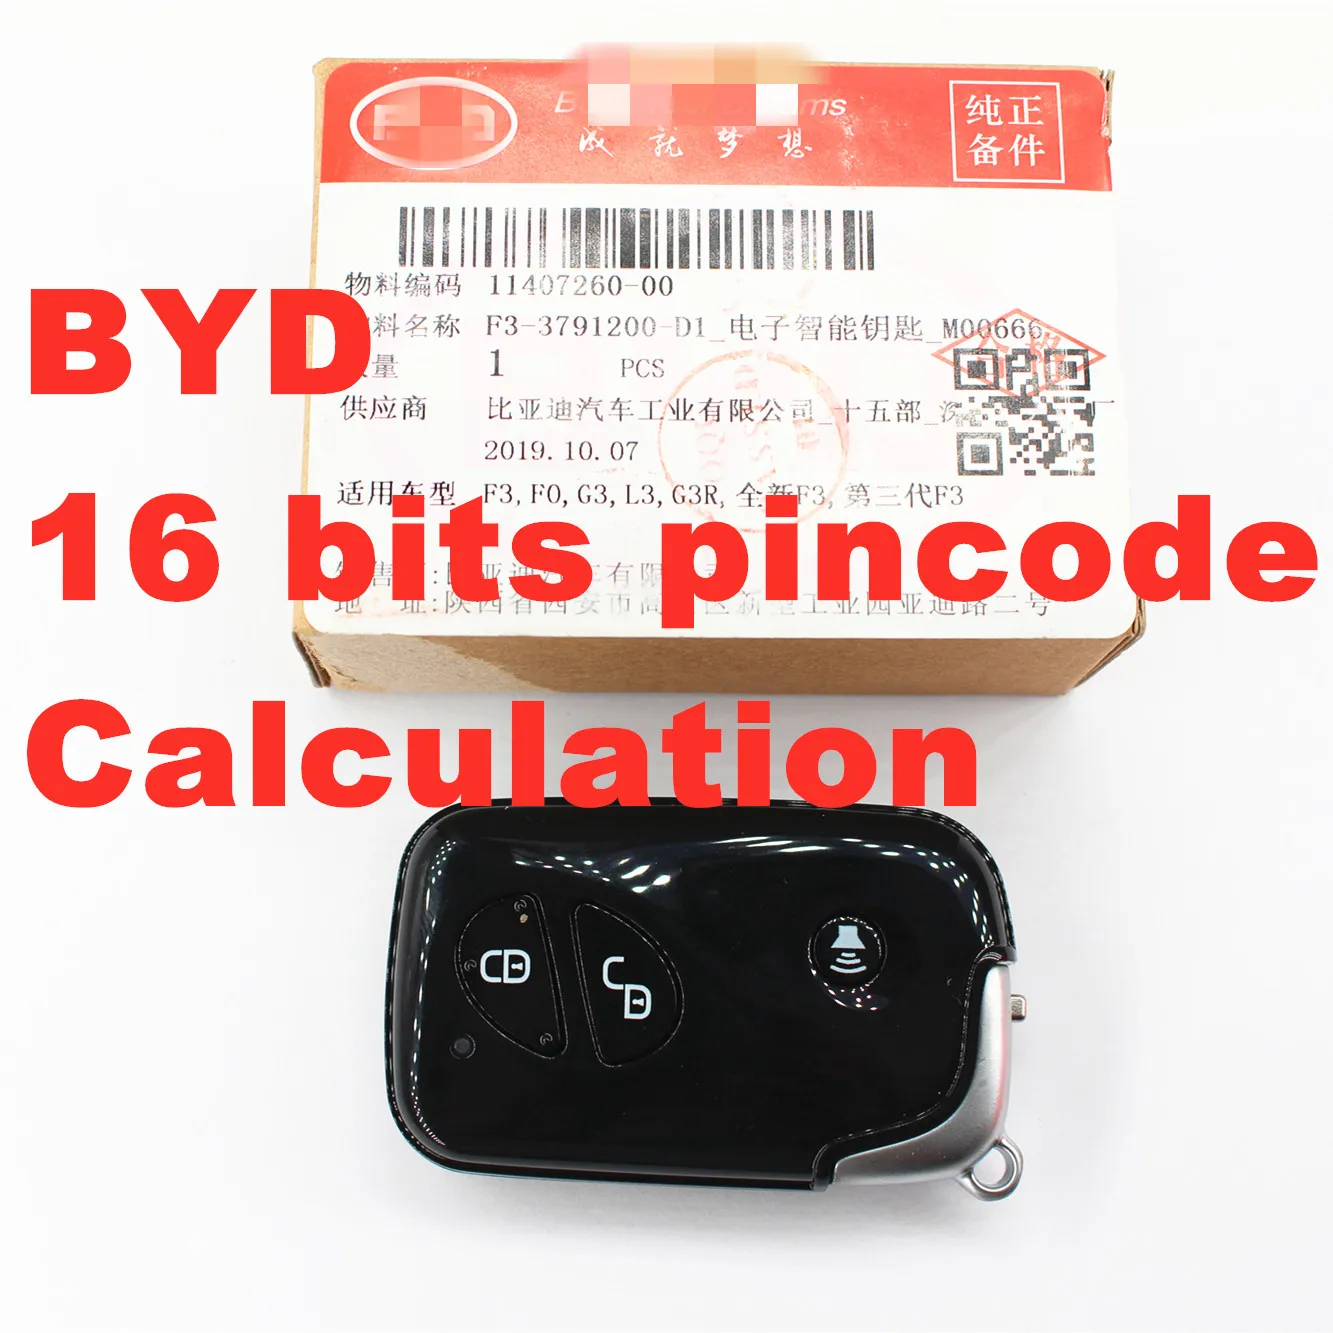 

BYD 16 bit immobilizer pin code calculation service